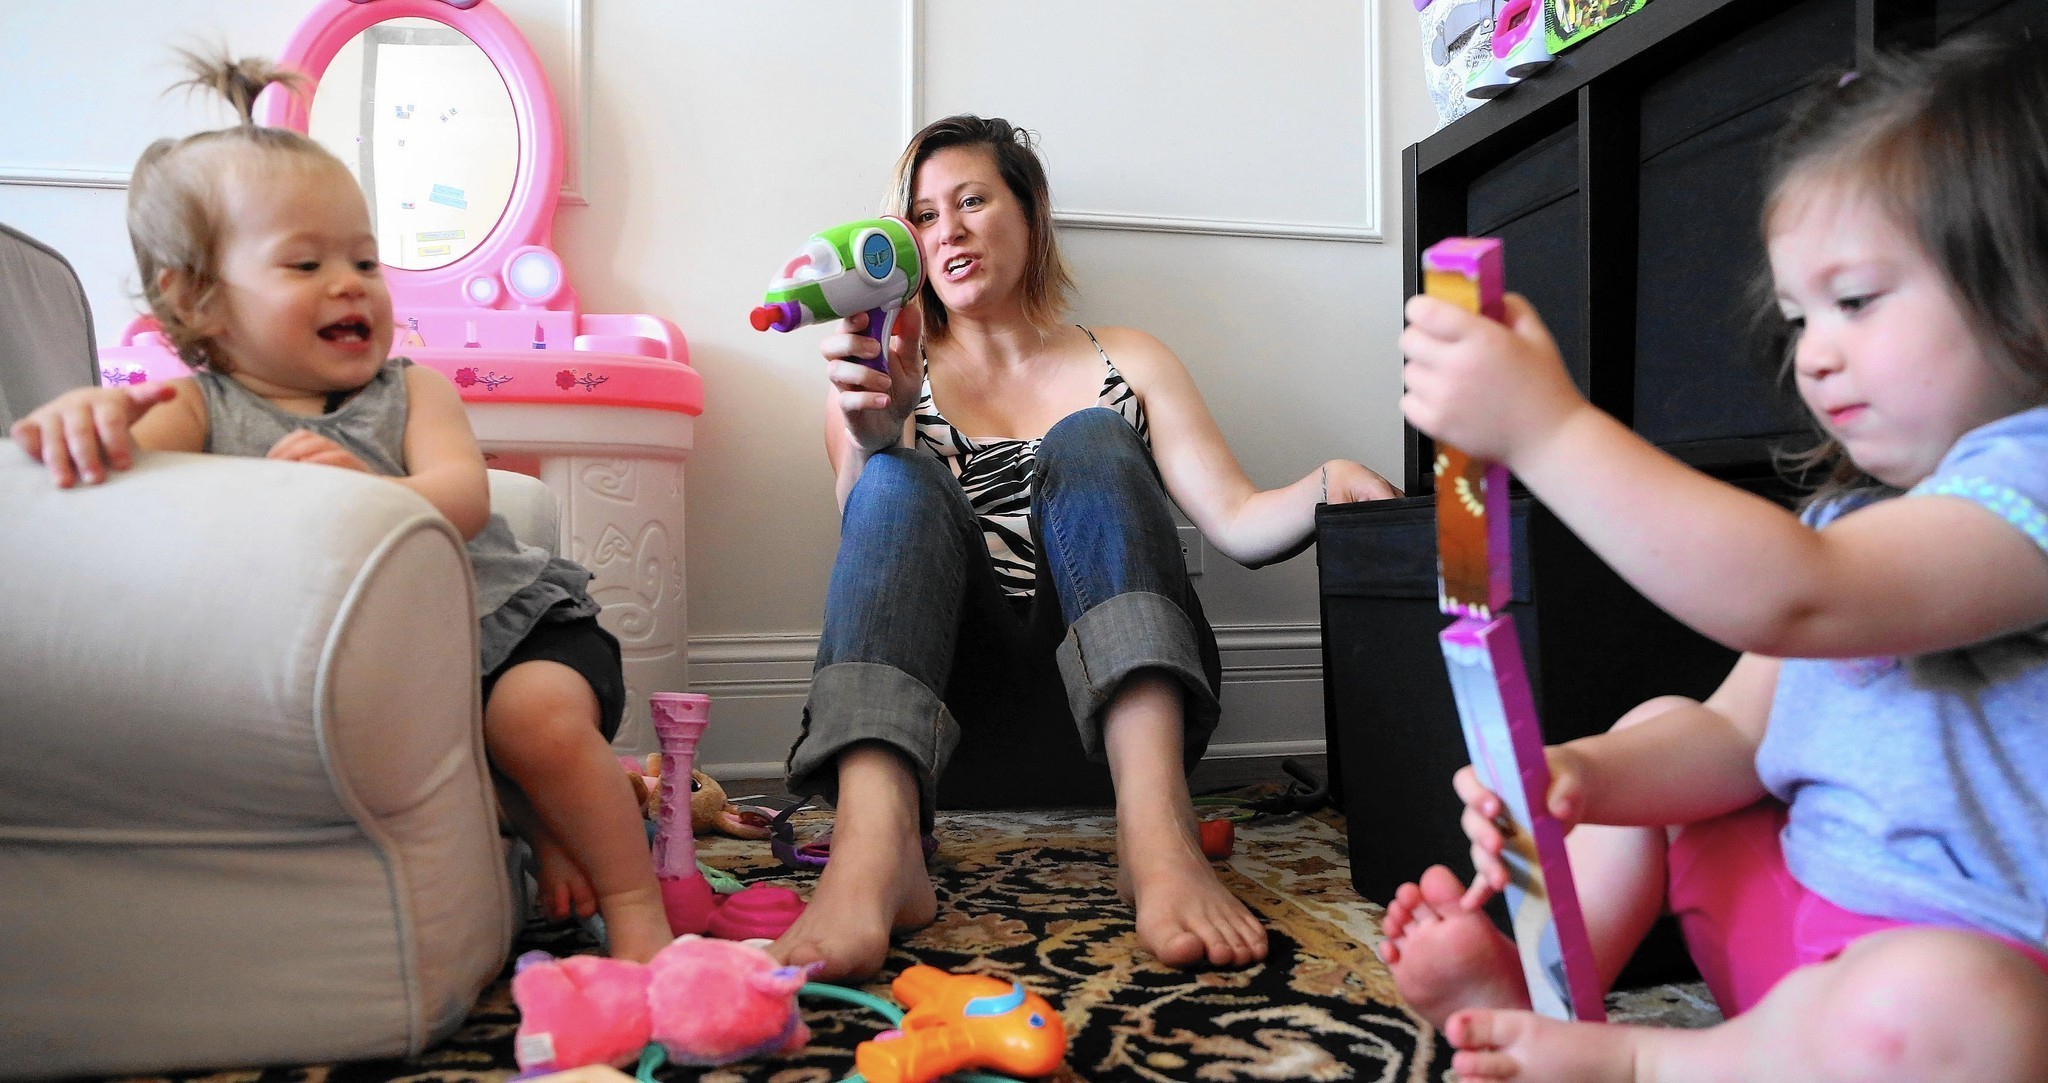 Being a stay-at-home mom is not a happy job for some ...